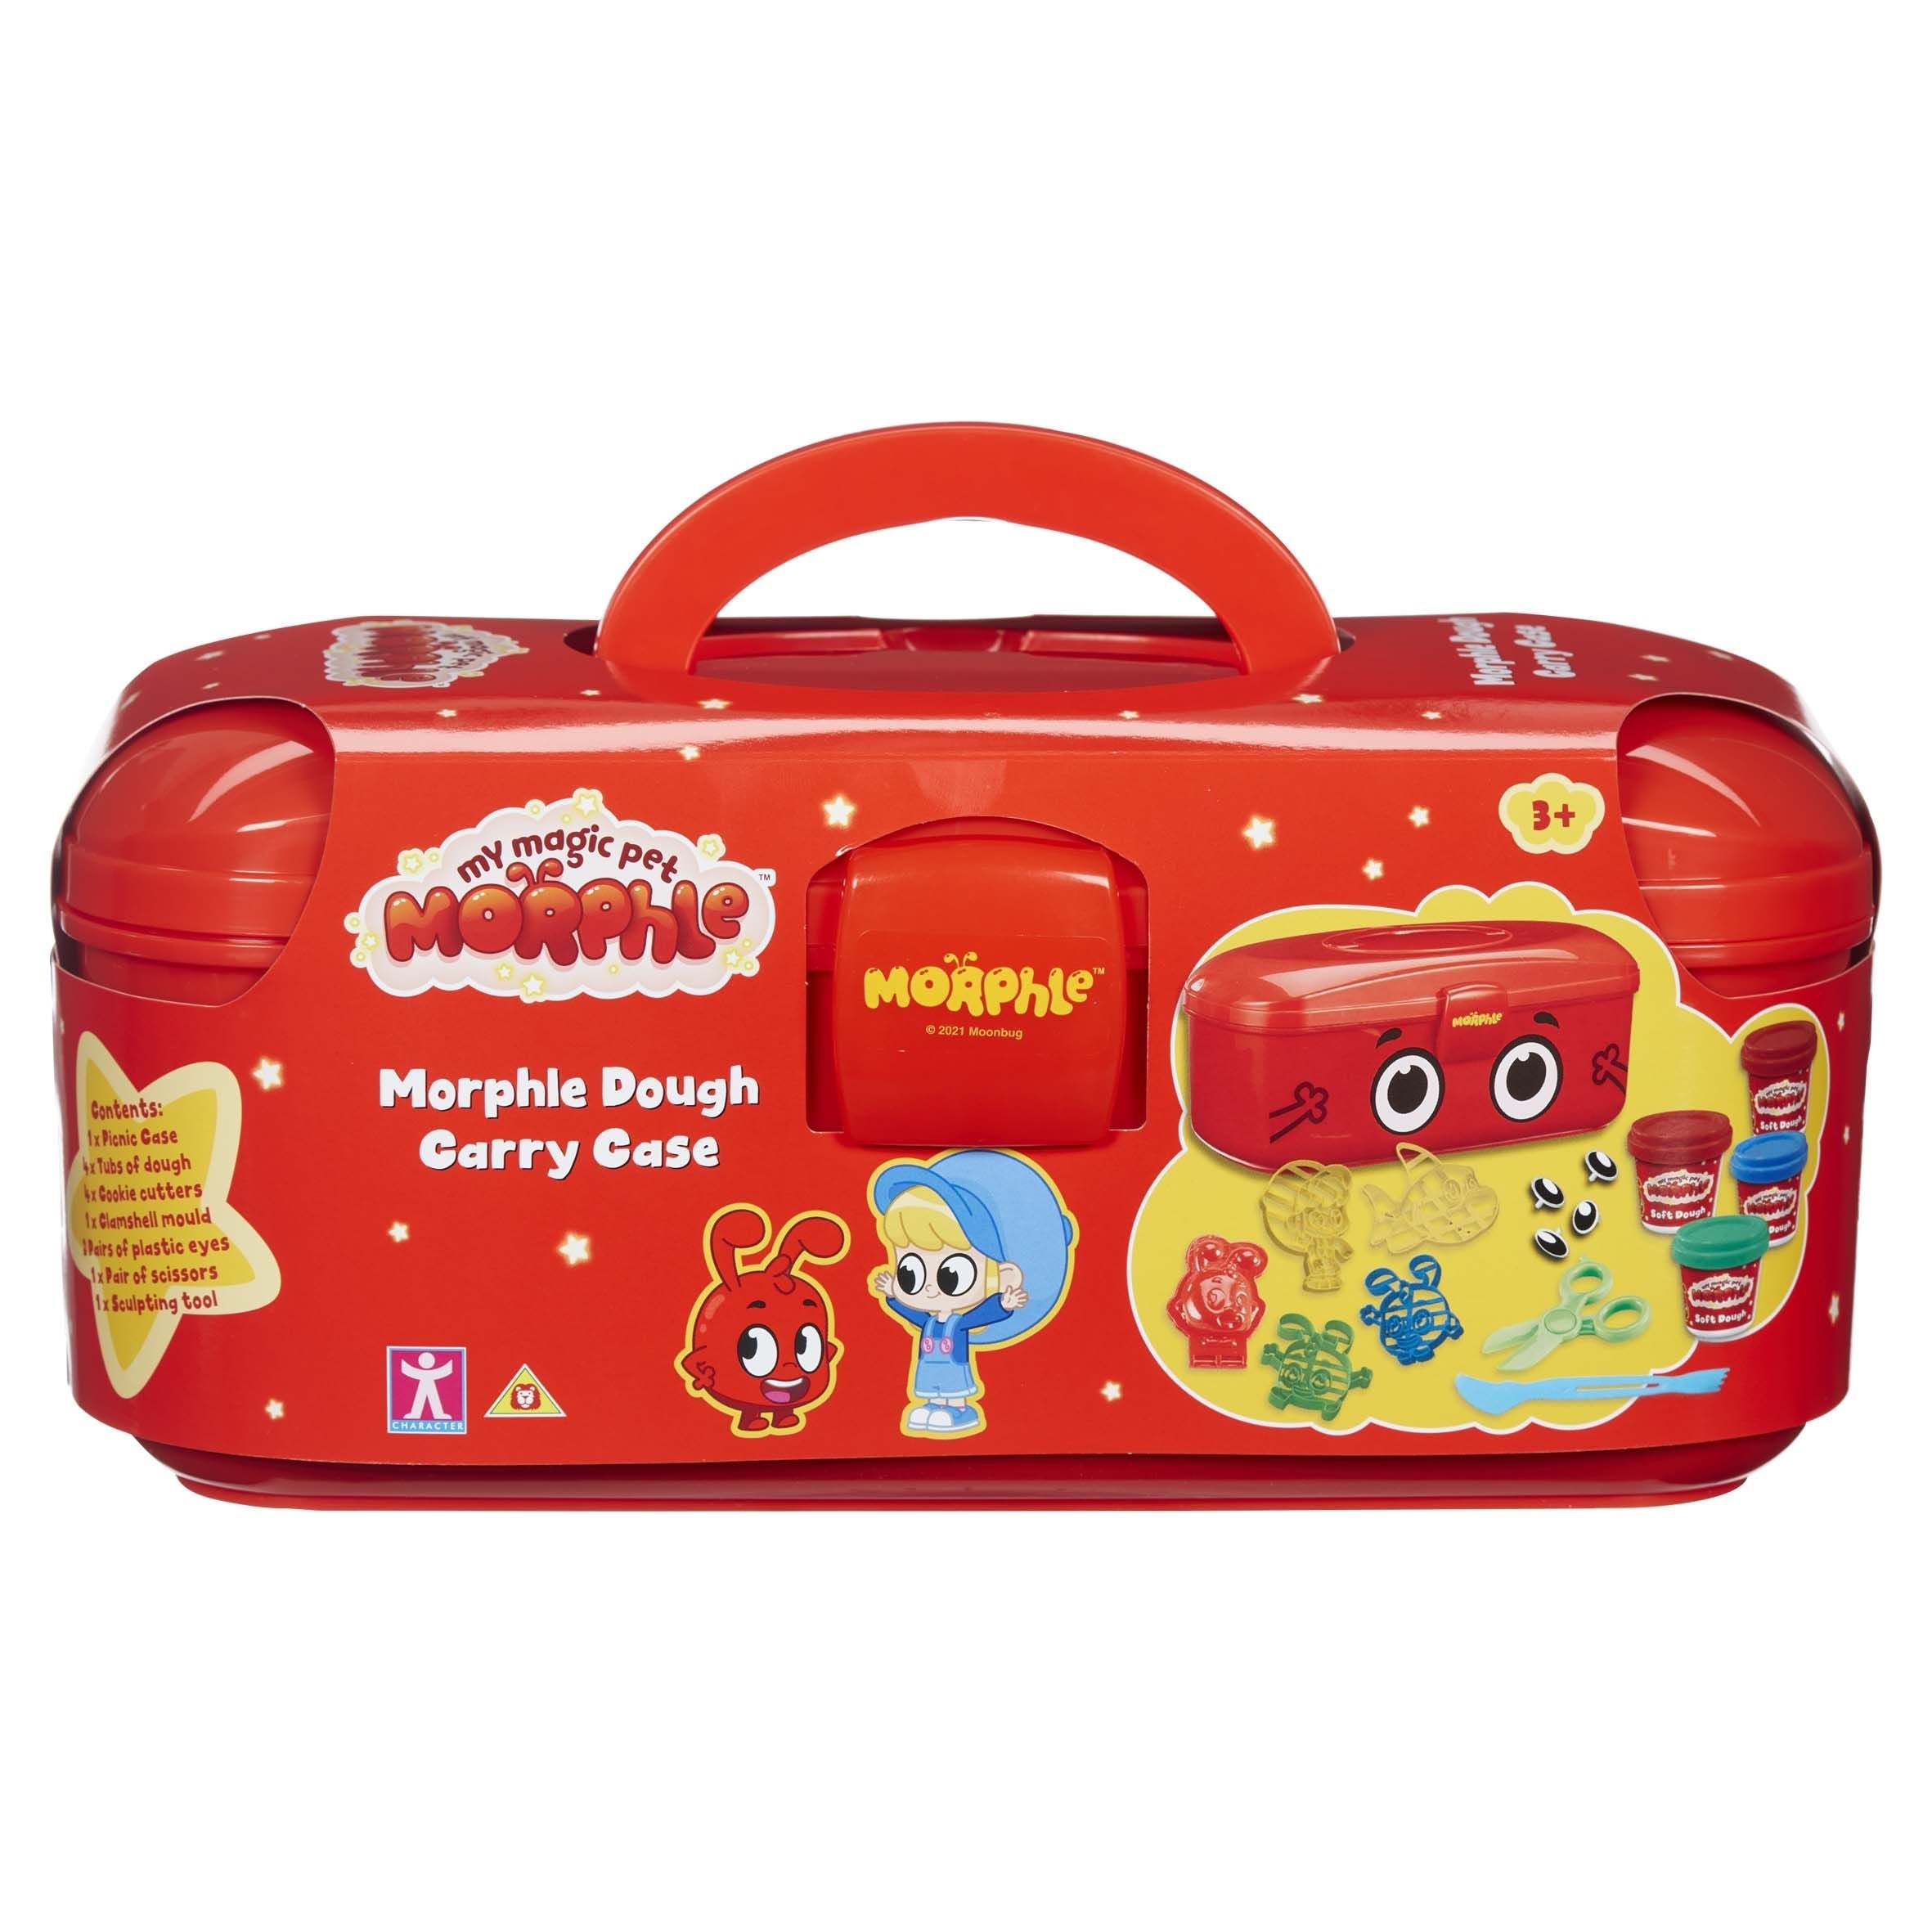 Morphle Dough Carry Case - Albagame